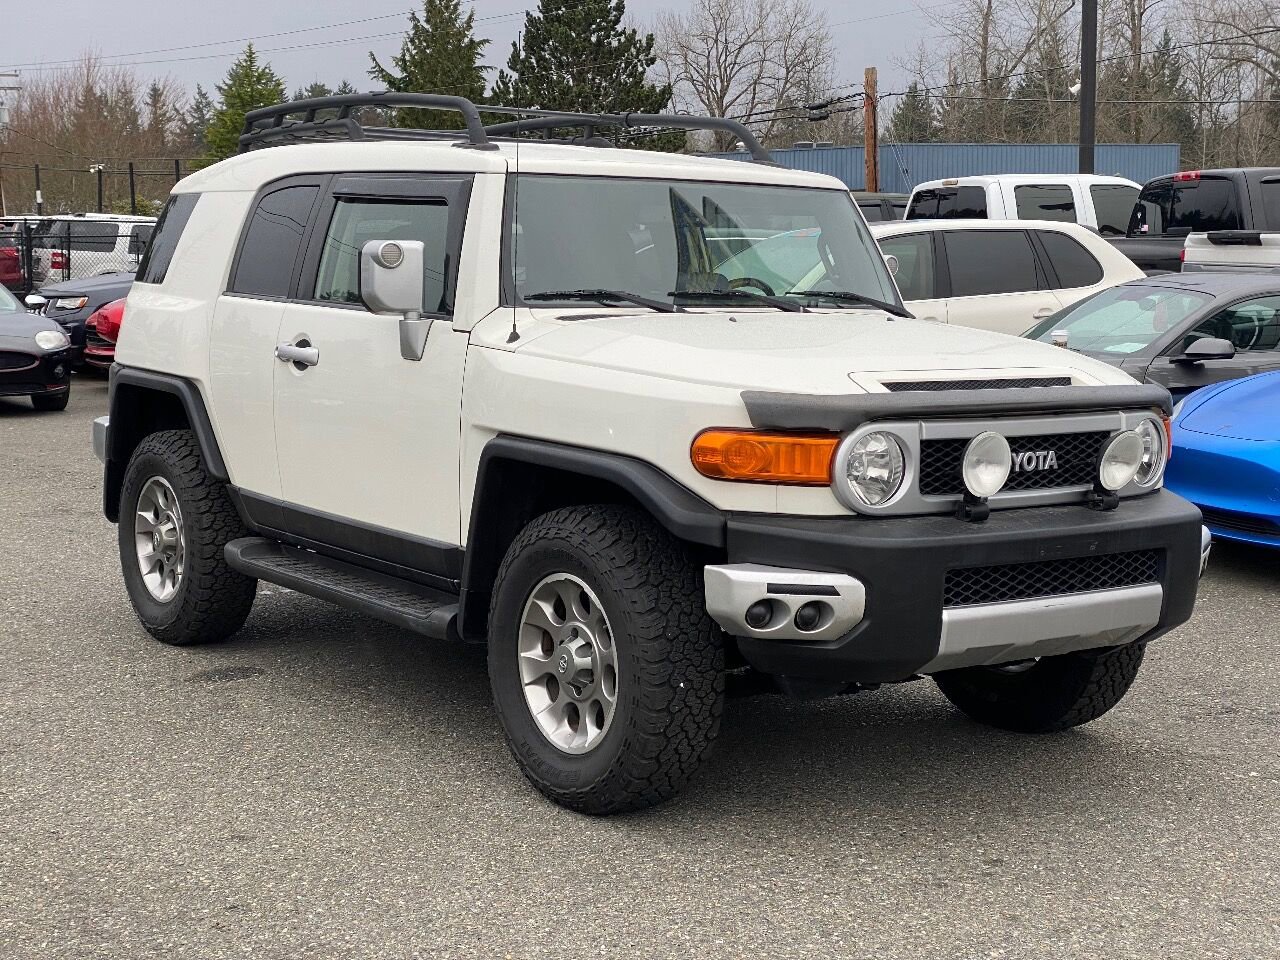 Used 2011 Toyota FJ Cruiser for Sale in Redmond, WA (Test Drive at Home) -  Kelley Blue Book